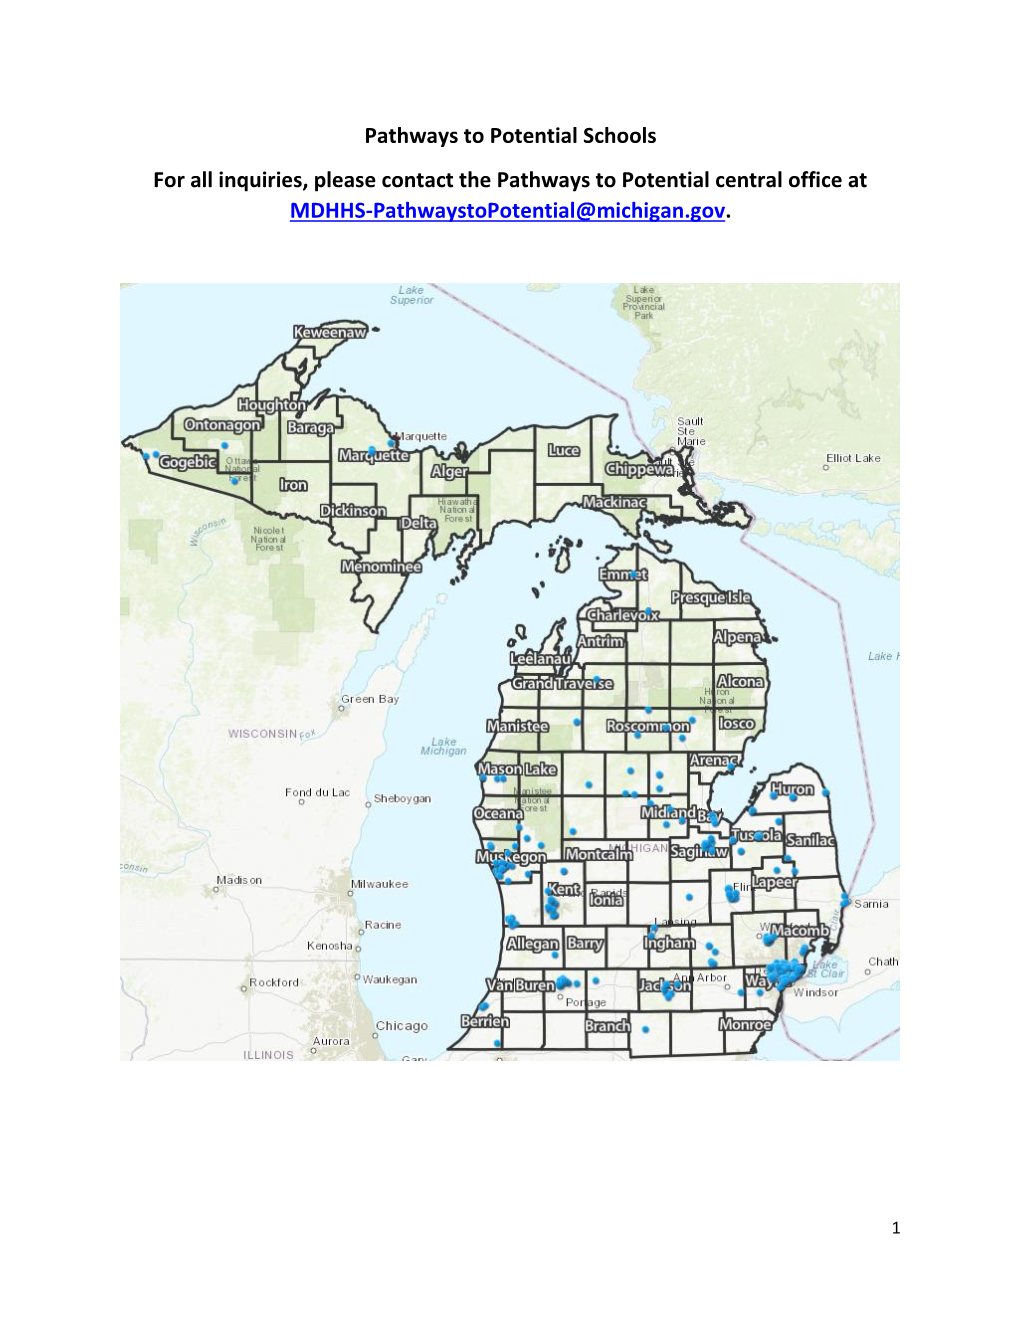 Pathways to Potential Schools for All Inquiries, Please Contact the Pathways to Potential Central Office at MDHHS-Pathwaystopotential@Michigan.Gov